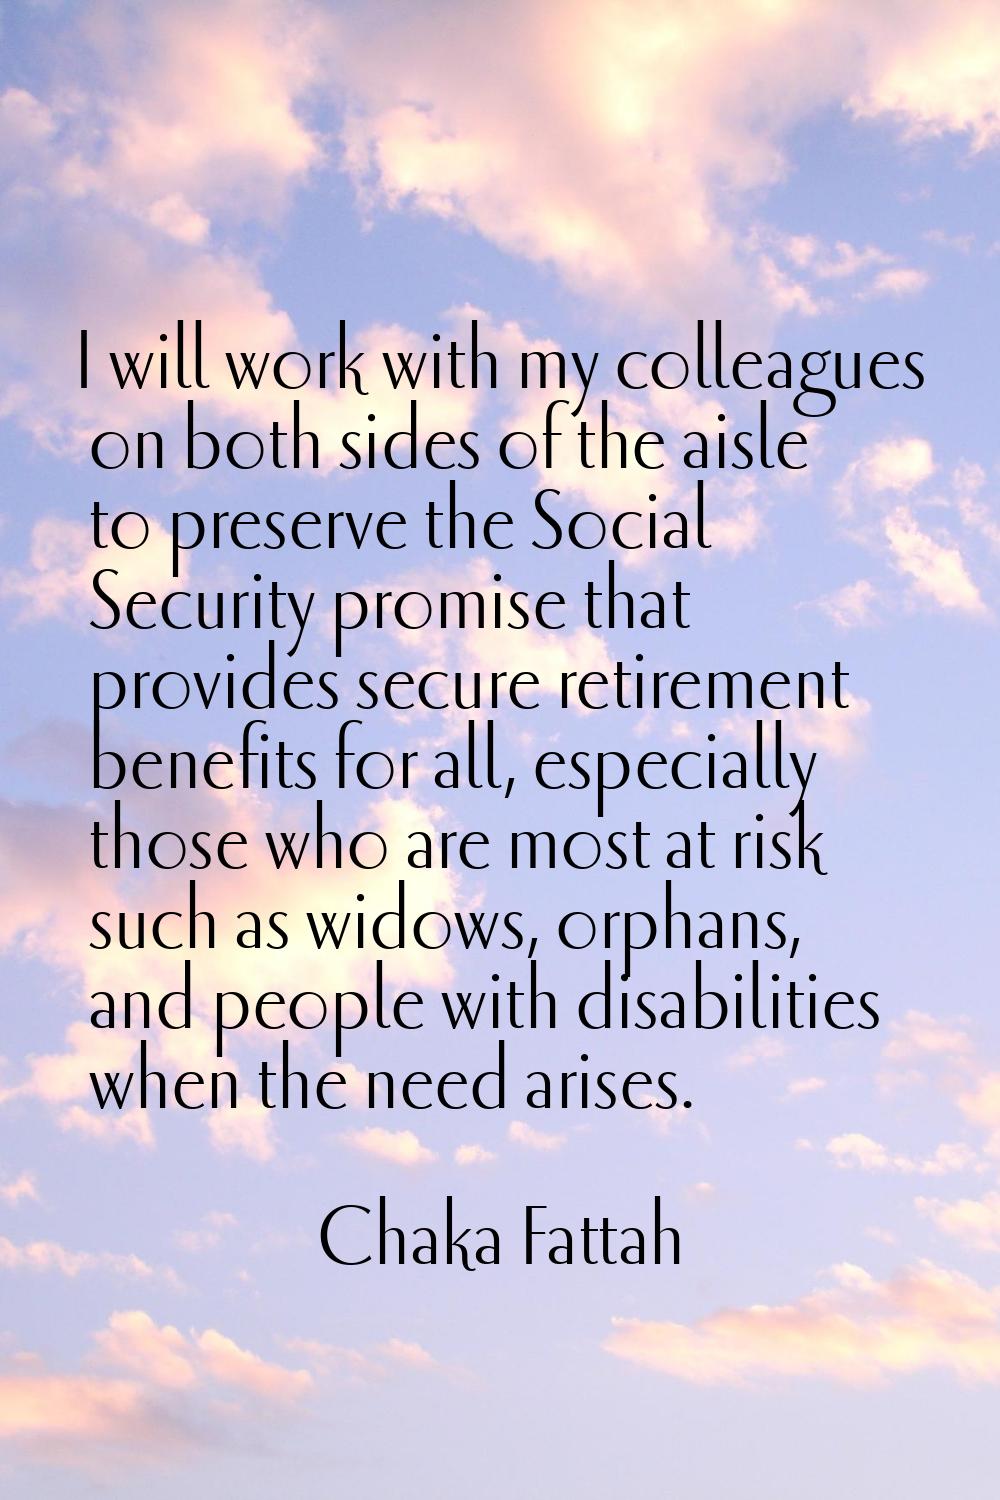 I will work with my colleagues on both sides of the aisle to preserve the Social Security promise t